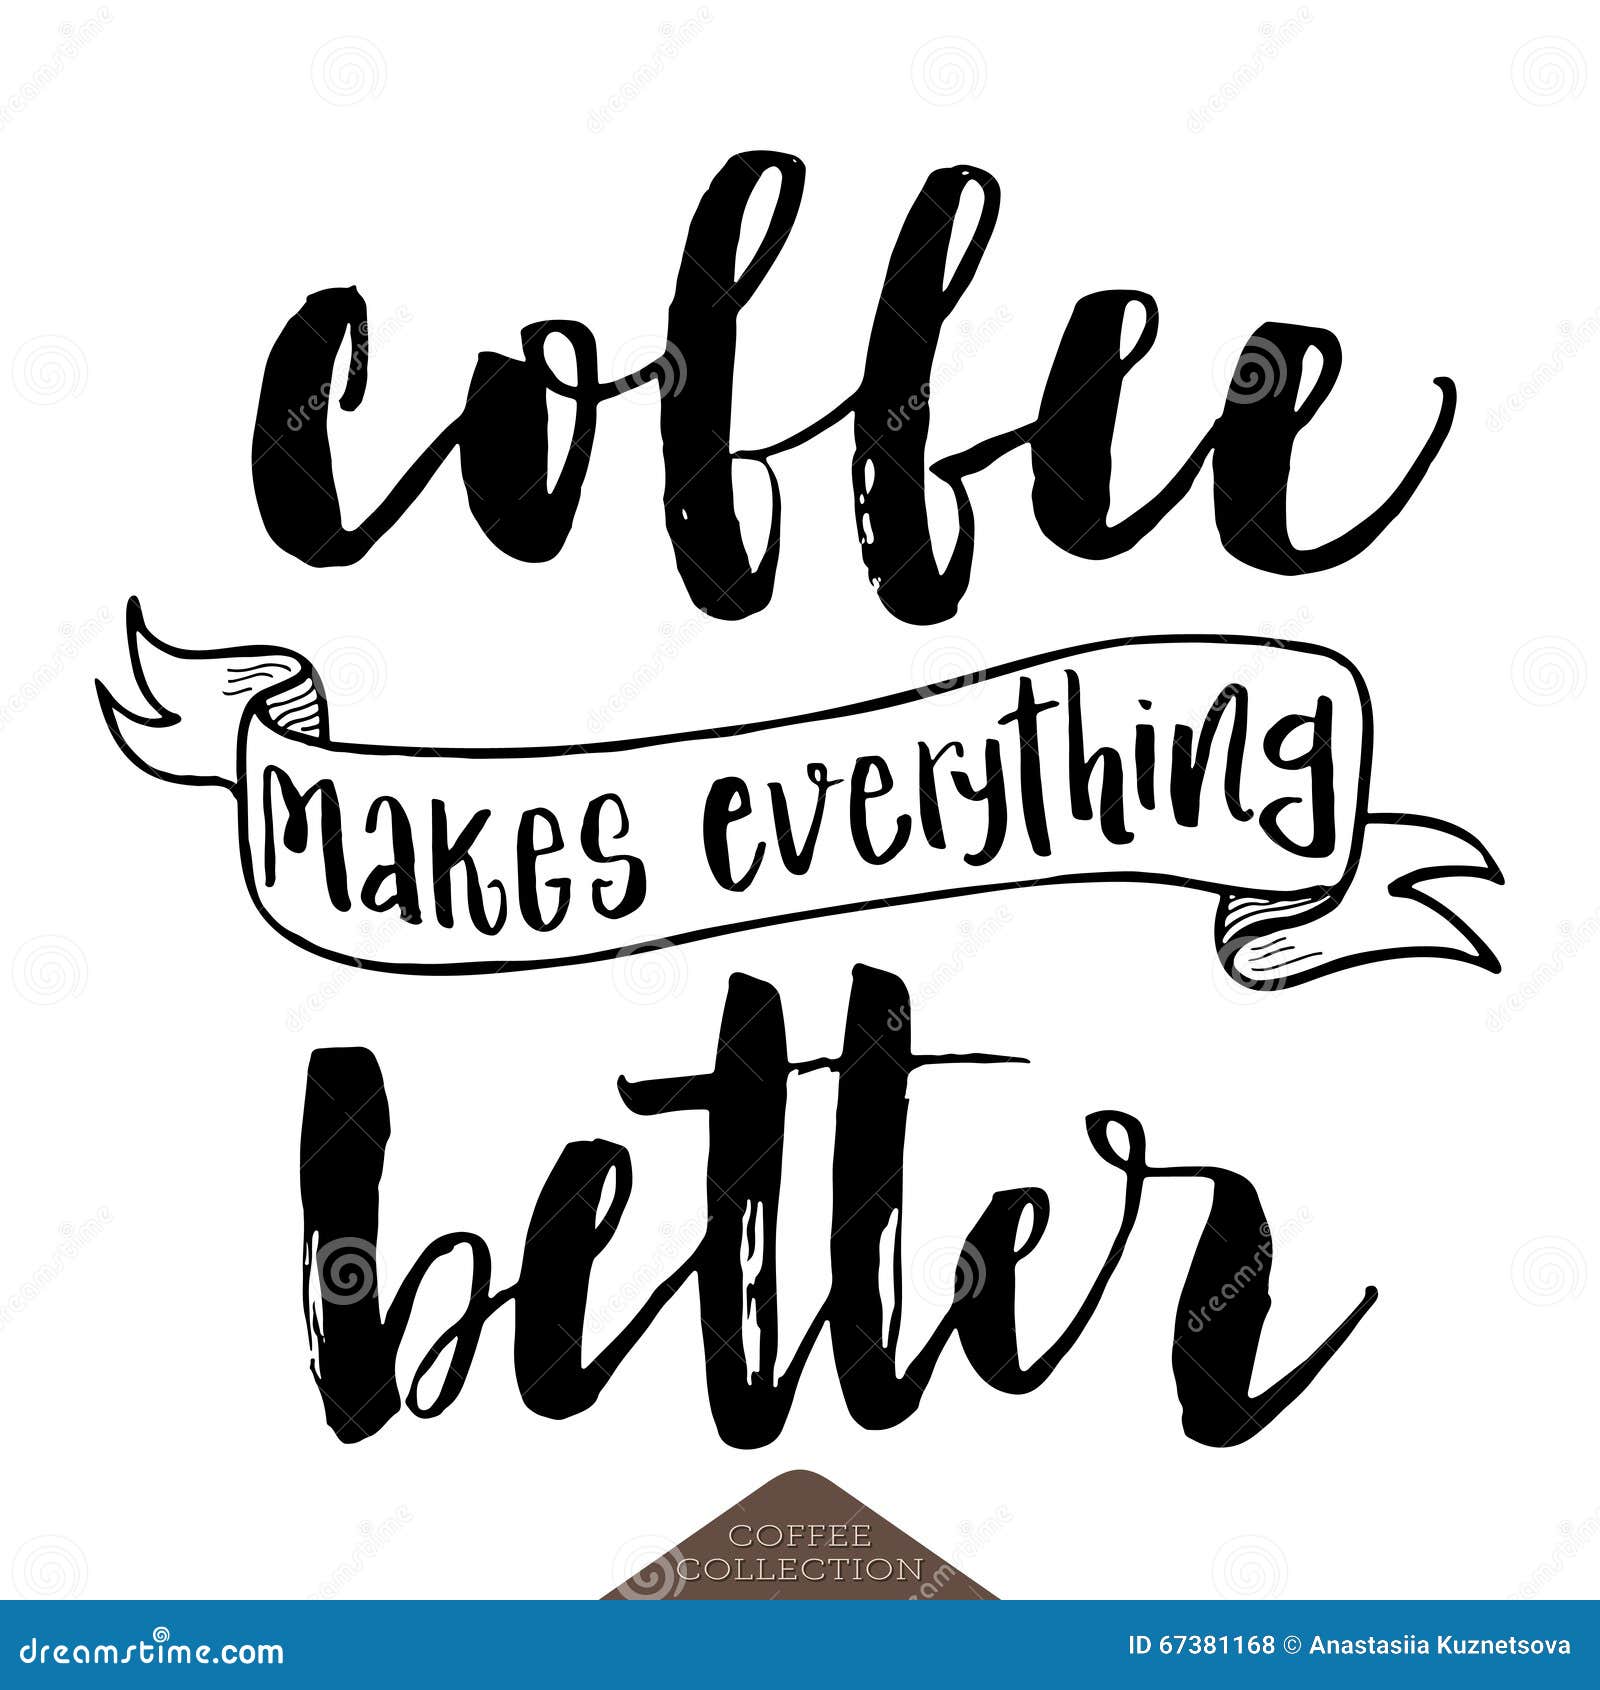 Everything well. Coffee makes everything better. Фразы про кофе на английском. Cofee posters Letter.